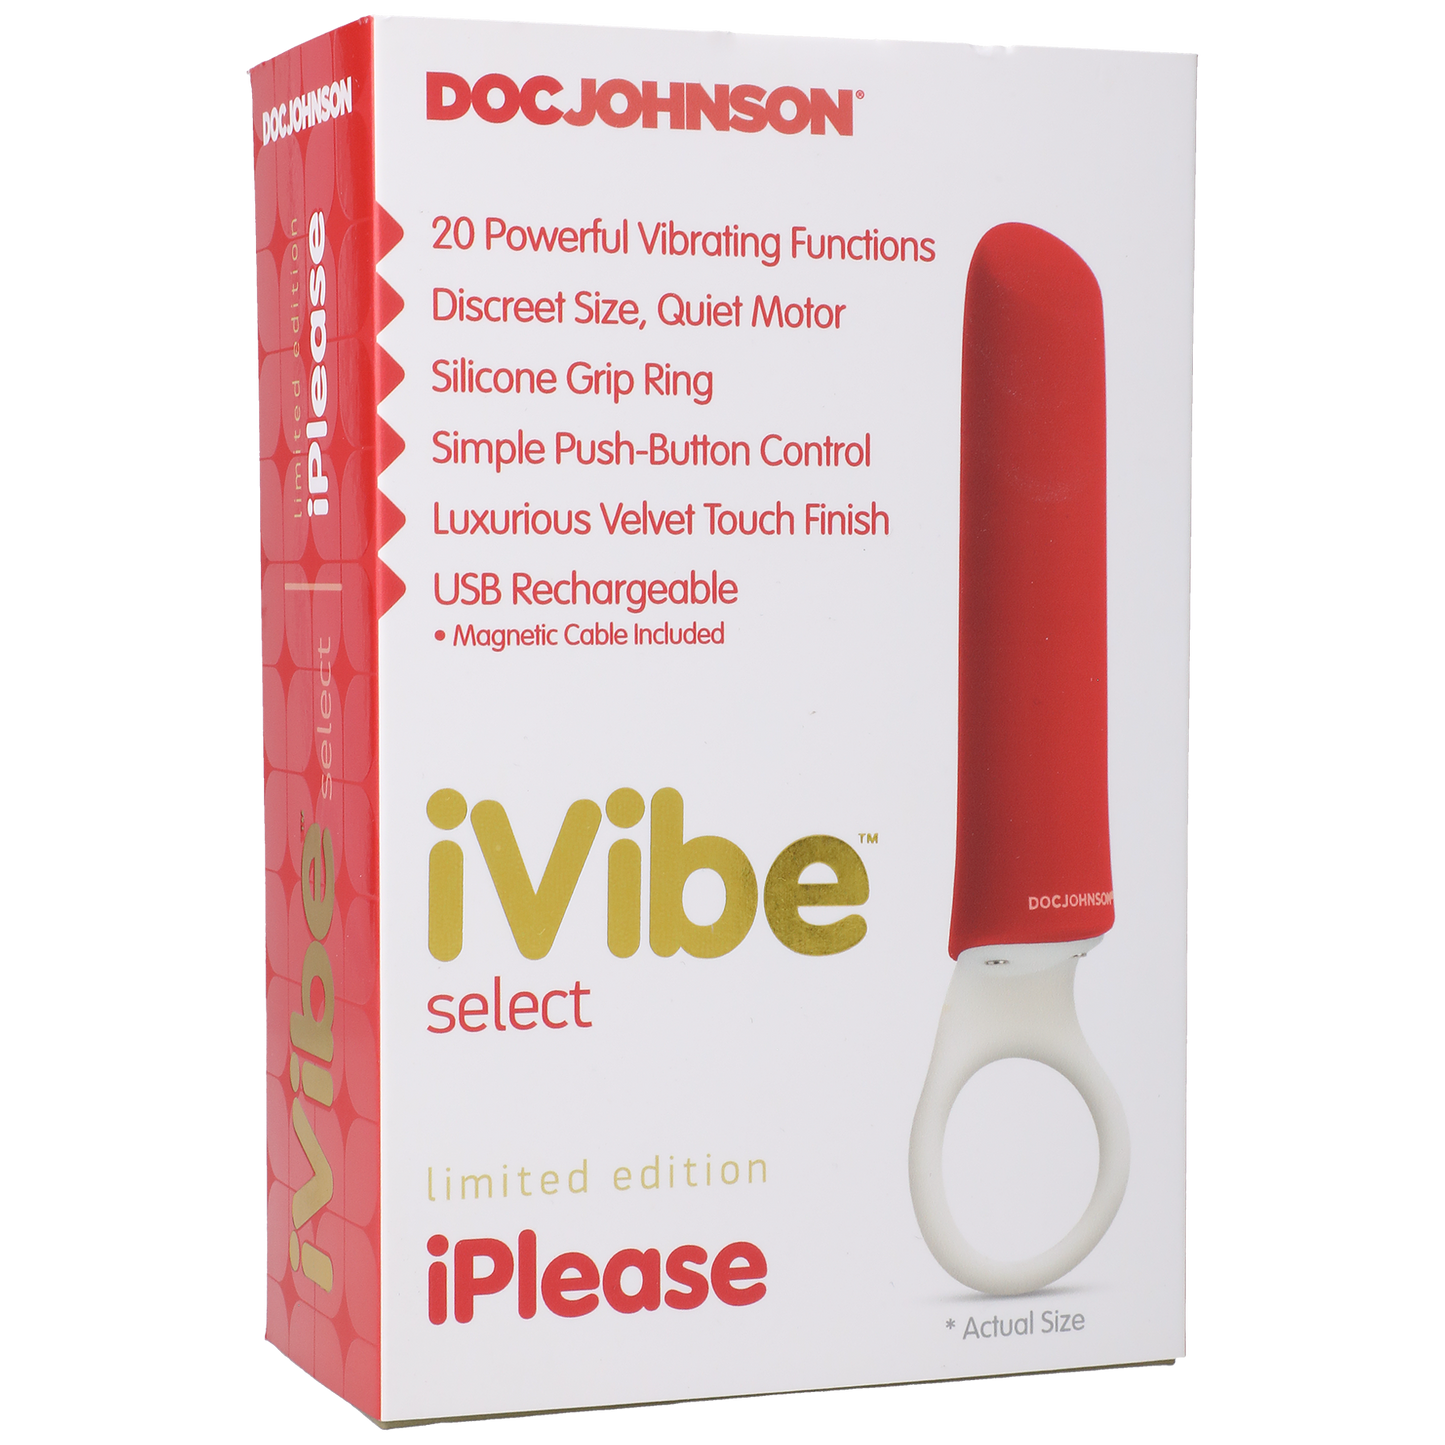 ivibe select iplease limited edition